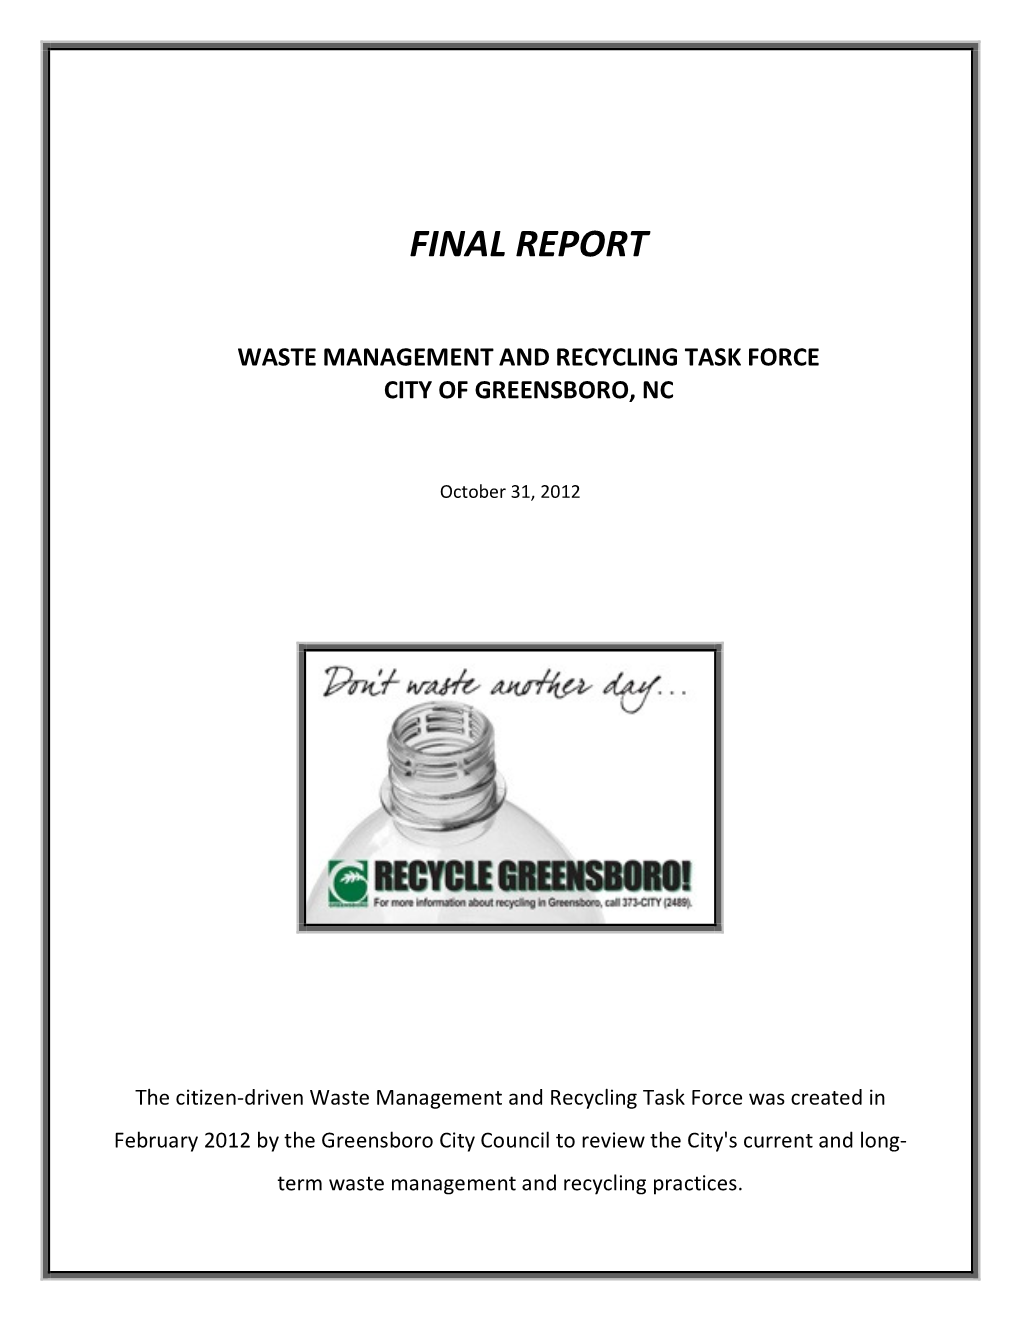 Final Report Waste Management and Recycling Task